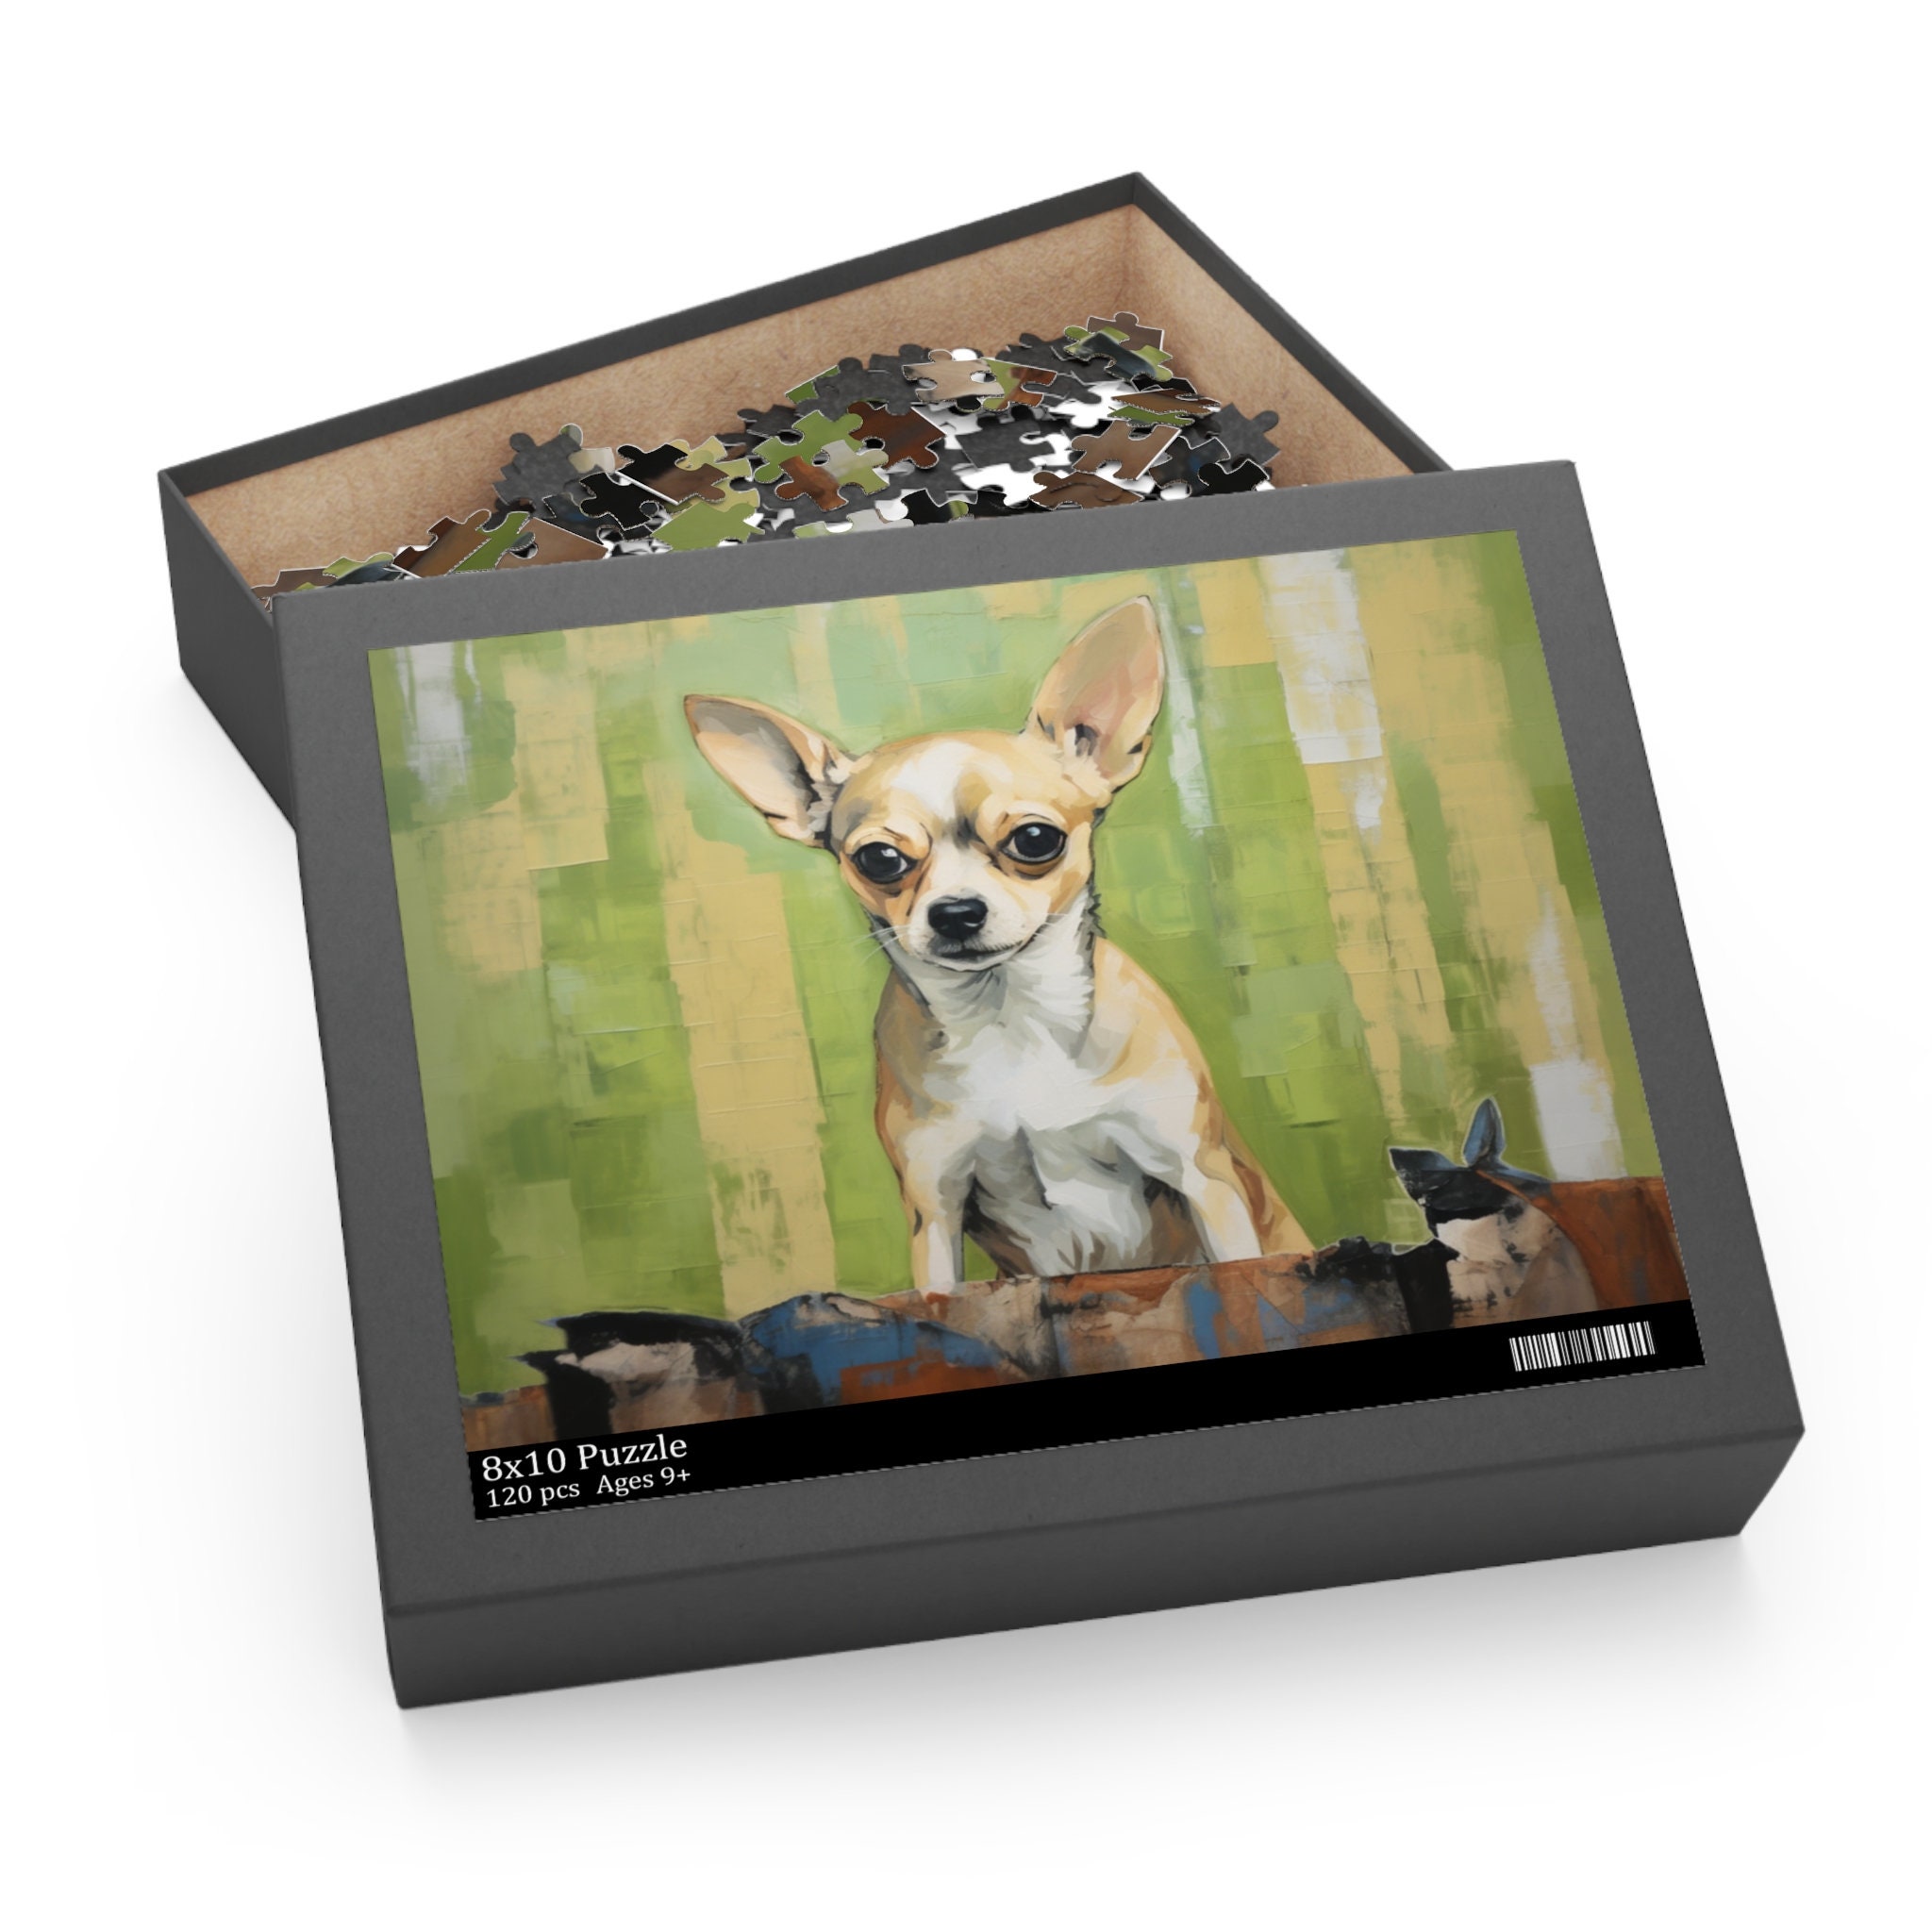 Chihuahua 1000 Piece Jigsaw Puzzle By Go! Games Fun For The Whole